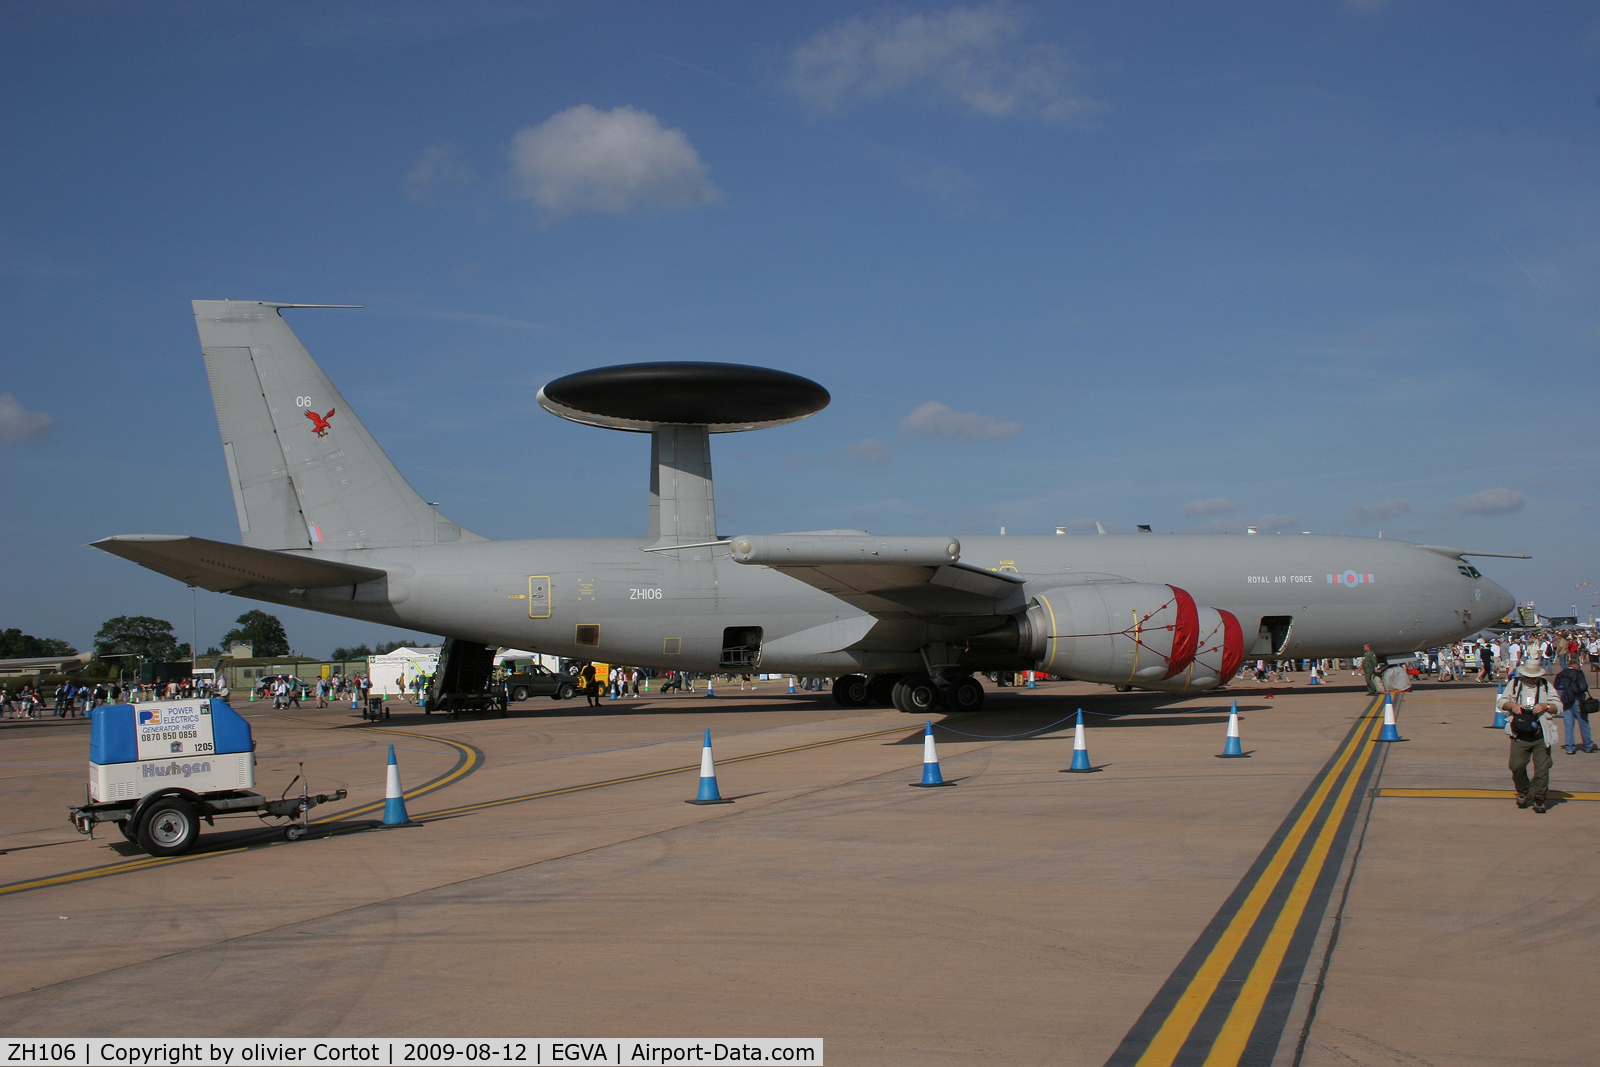 ZH106, 1991 Boeing E-3D Sentry AEW.1 C/N 24114, On display at the RIAT 2005